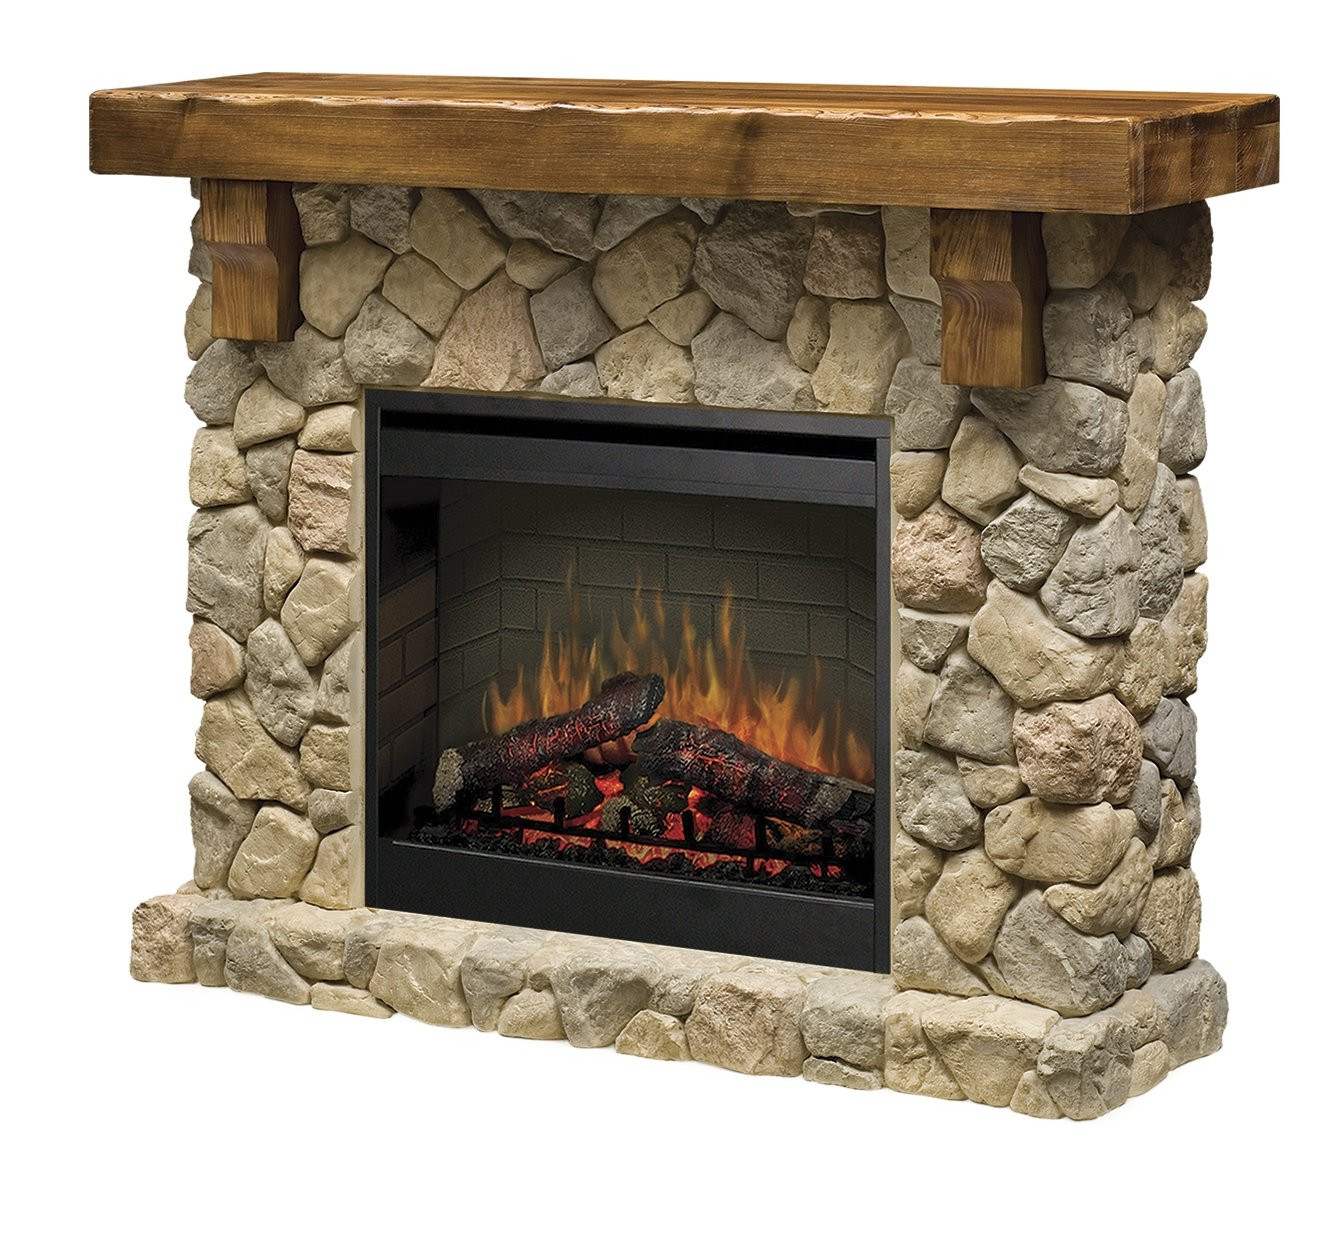 Stone Look Electric Fireplace
 5 Beautiful Faux Stone Electric Fireplaces